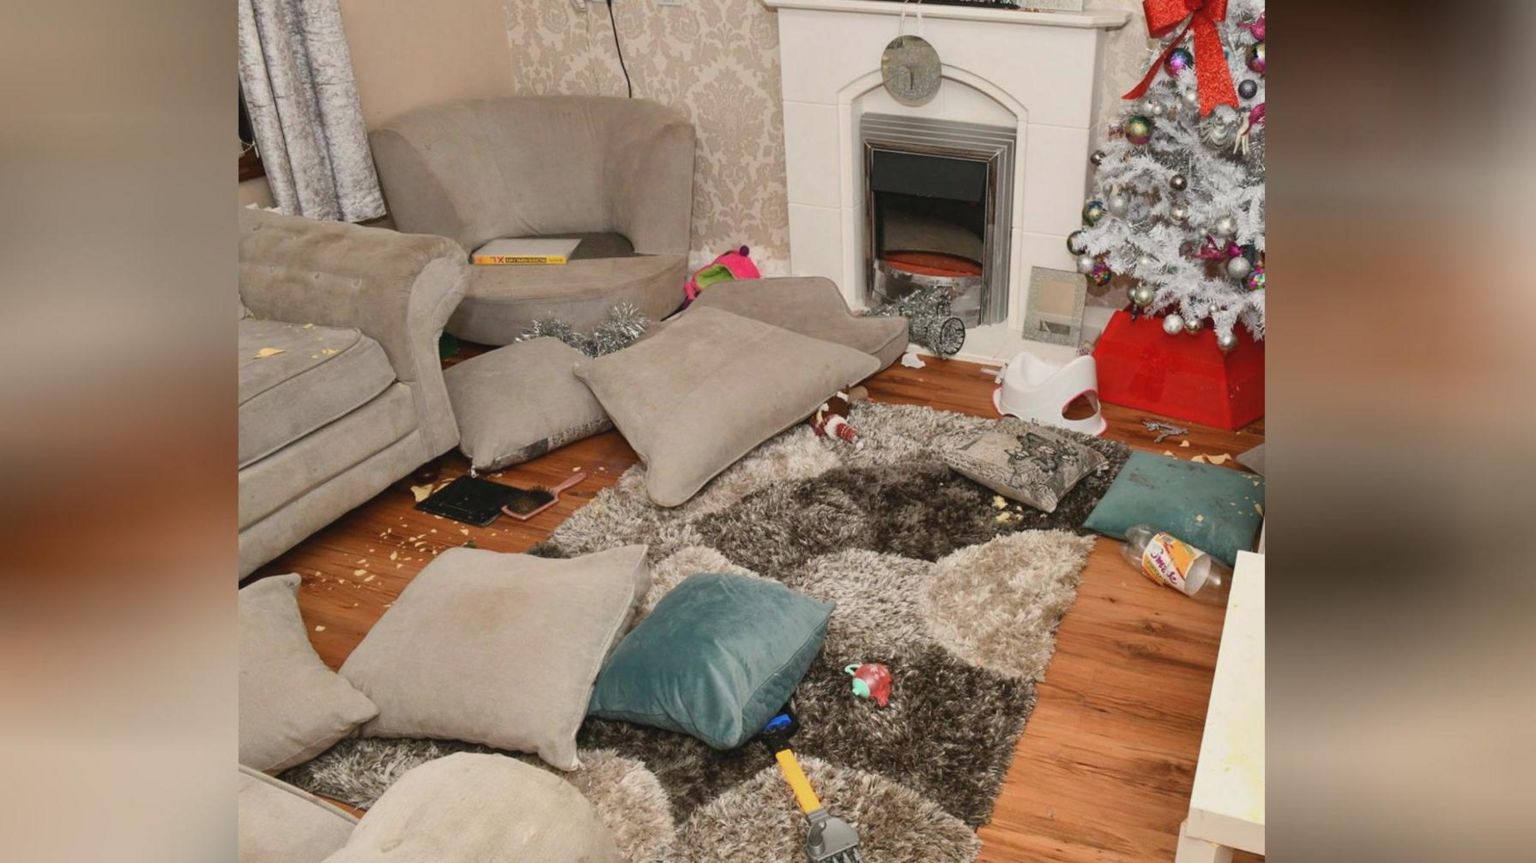 A crime scene photograph, released by the PSNI, of the house where Caoimhe Morgan's body was found